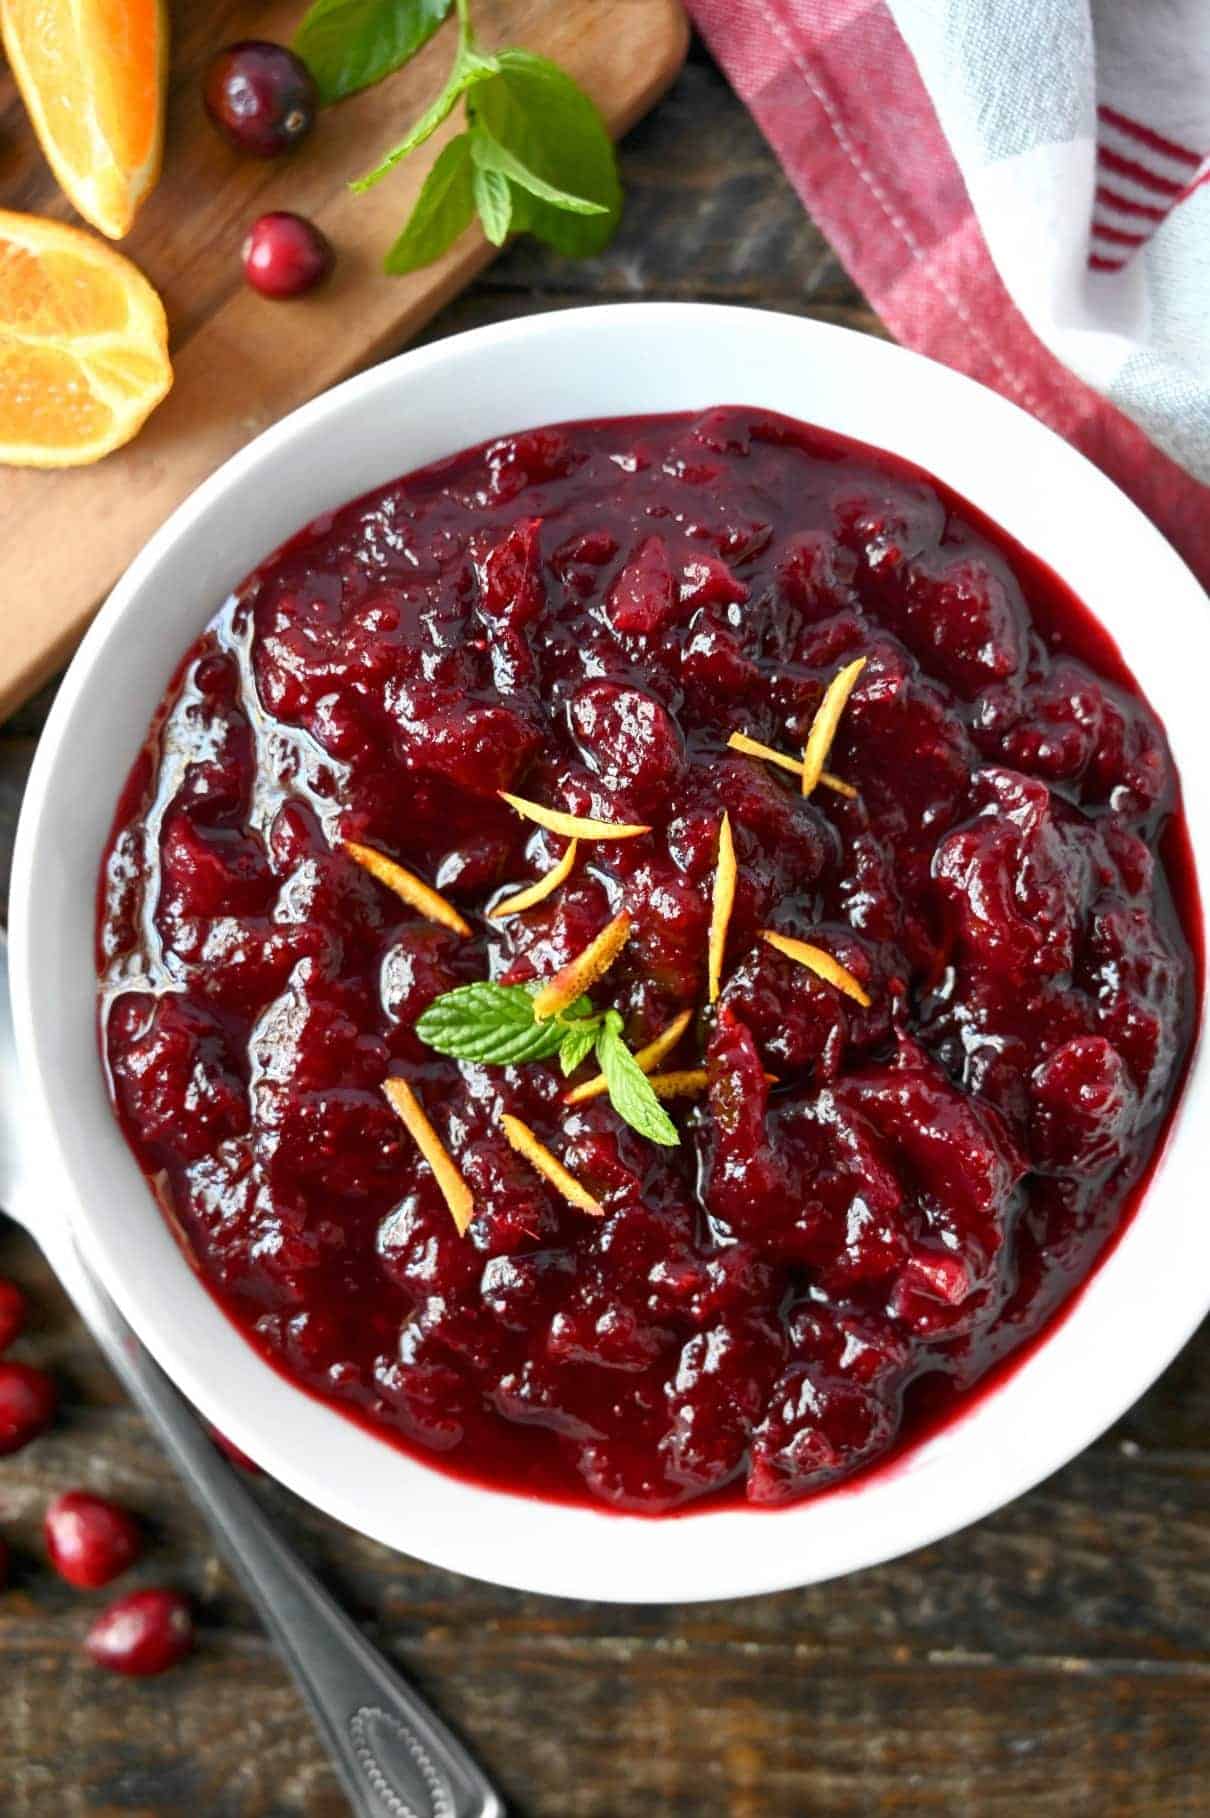 A bowl of fresh cranberry sauce with a sprig of mint in the center.